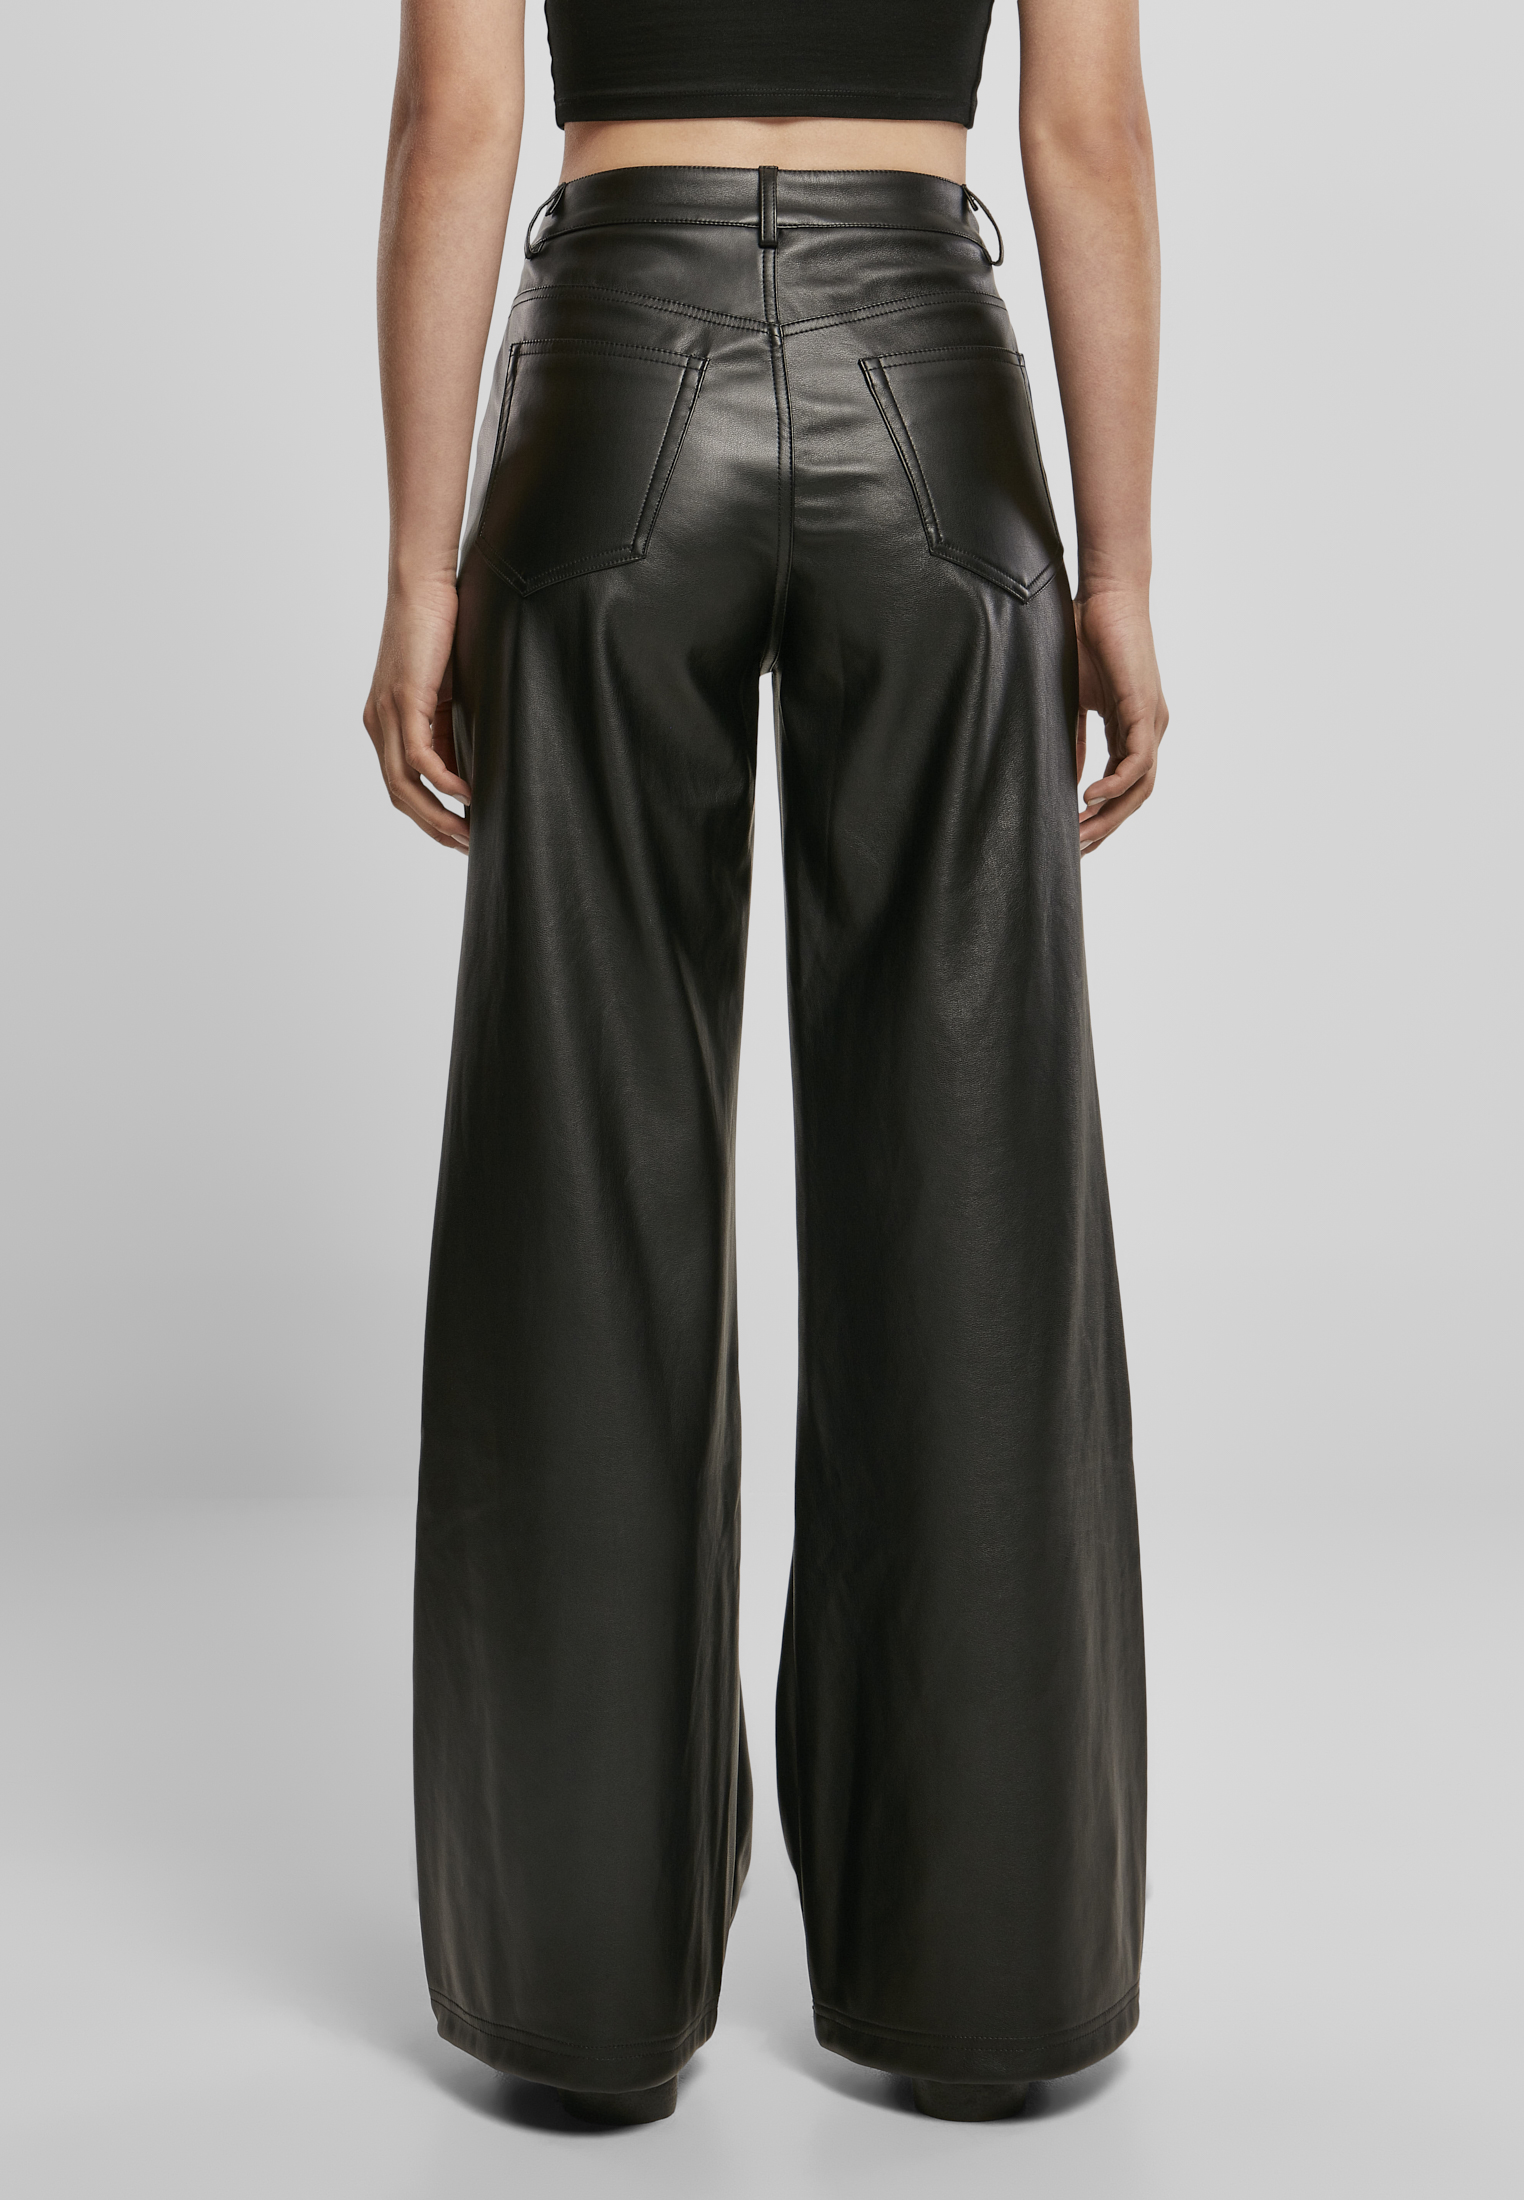 HDE Women's Faux Leather Pants High Waisted Trousers with Pockets